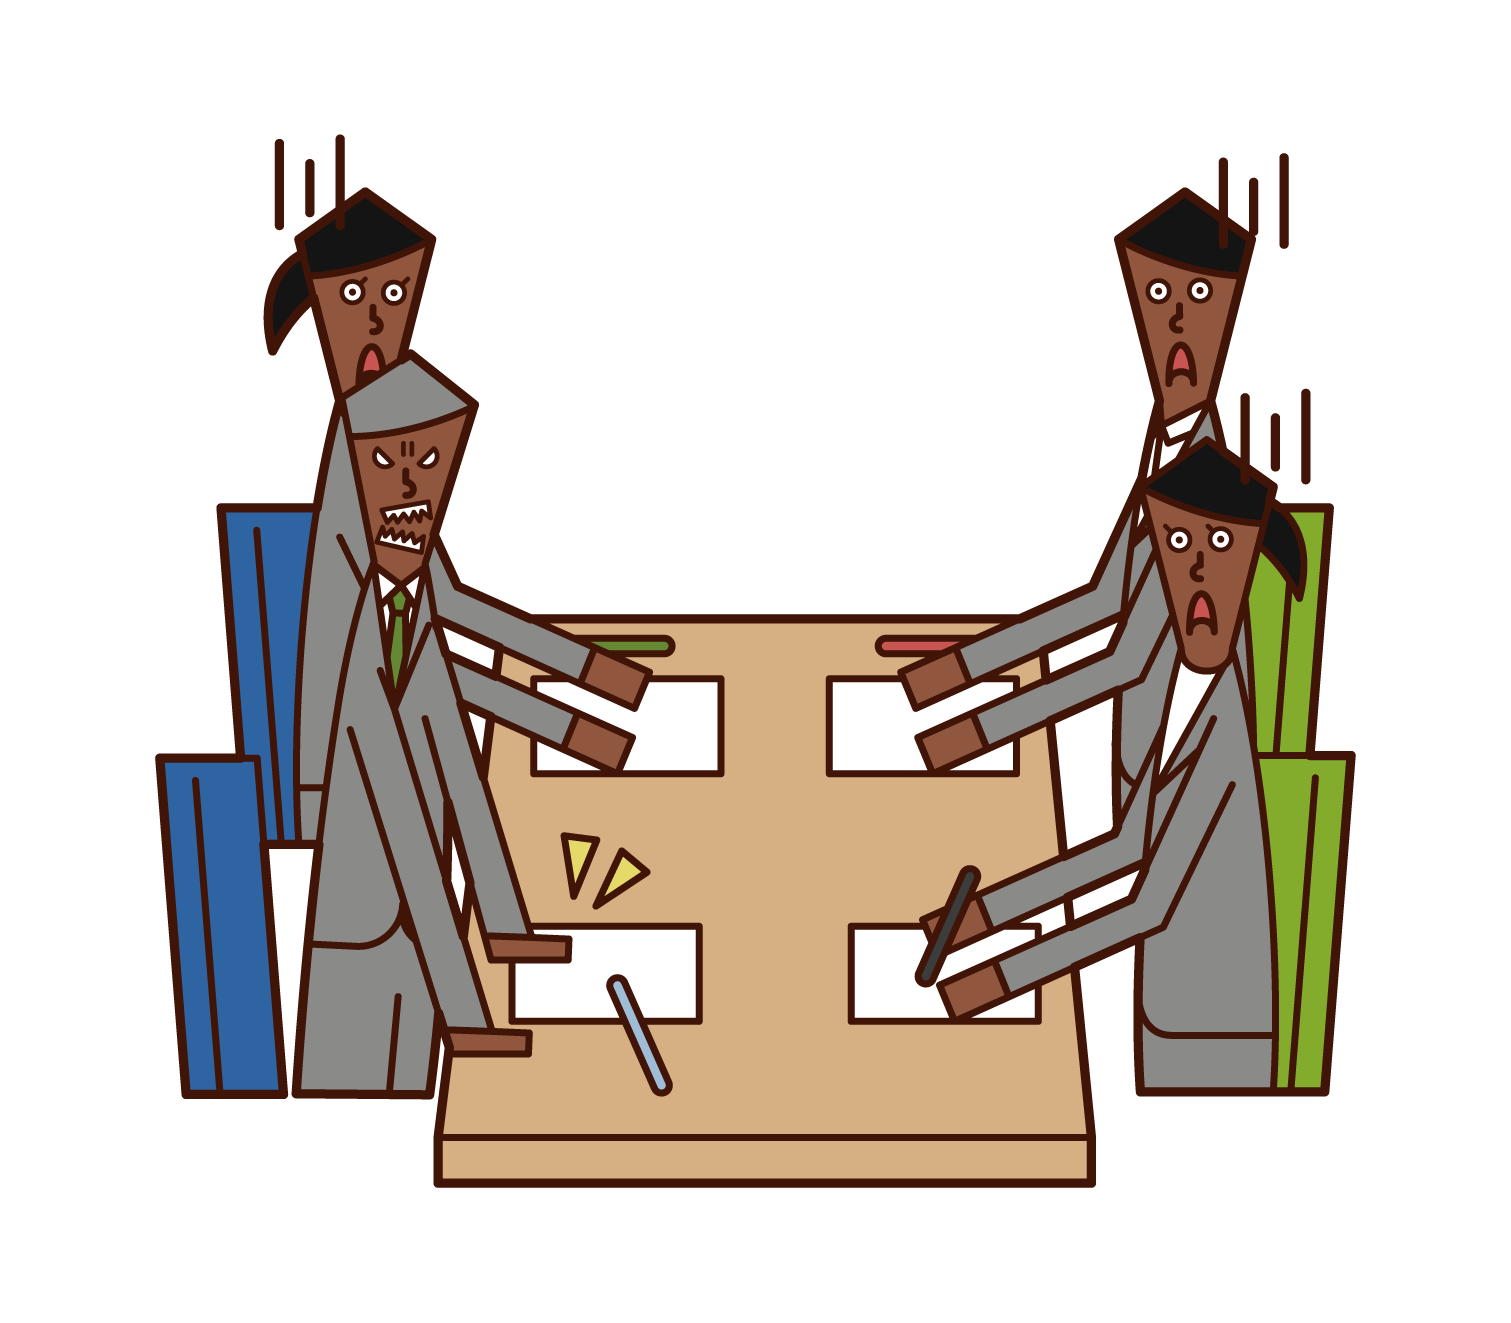 Illustration of a man angry at a meeting